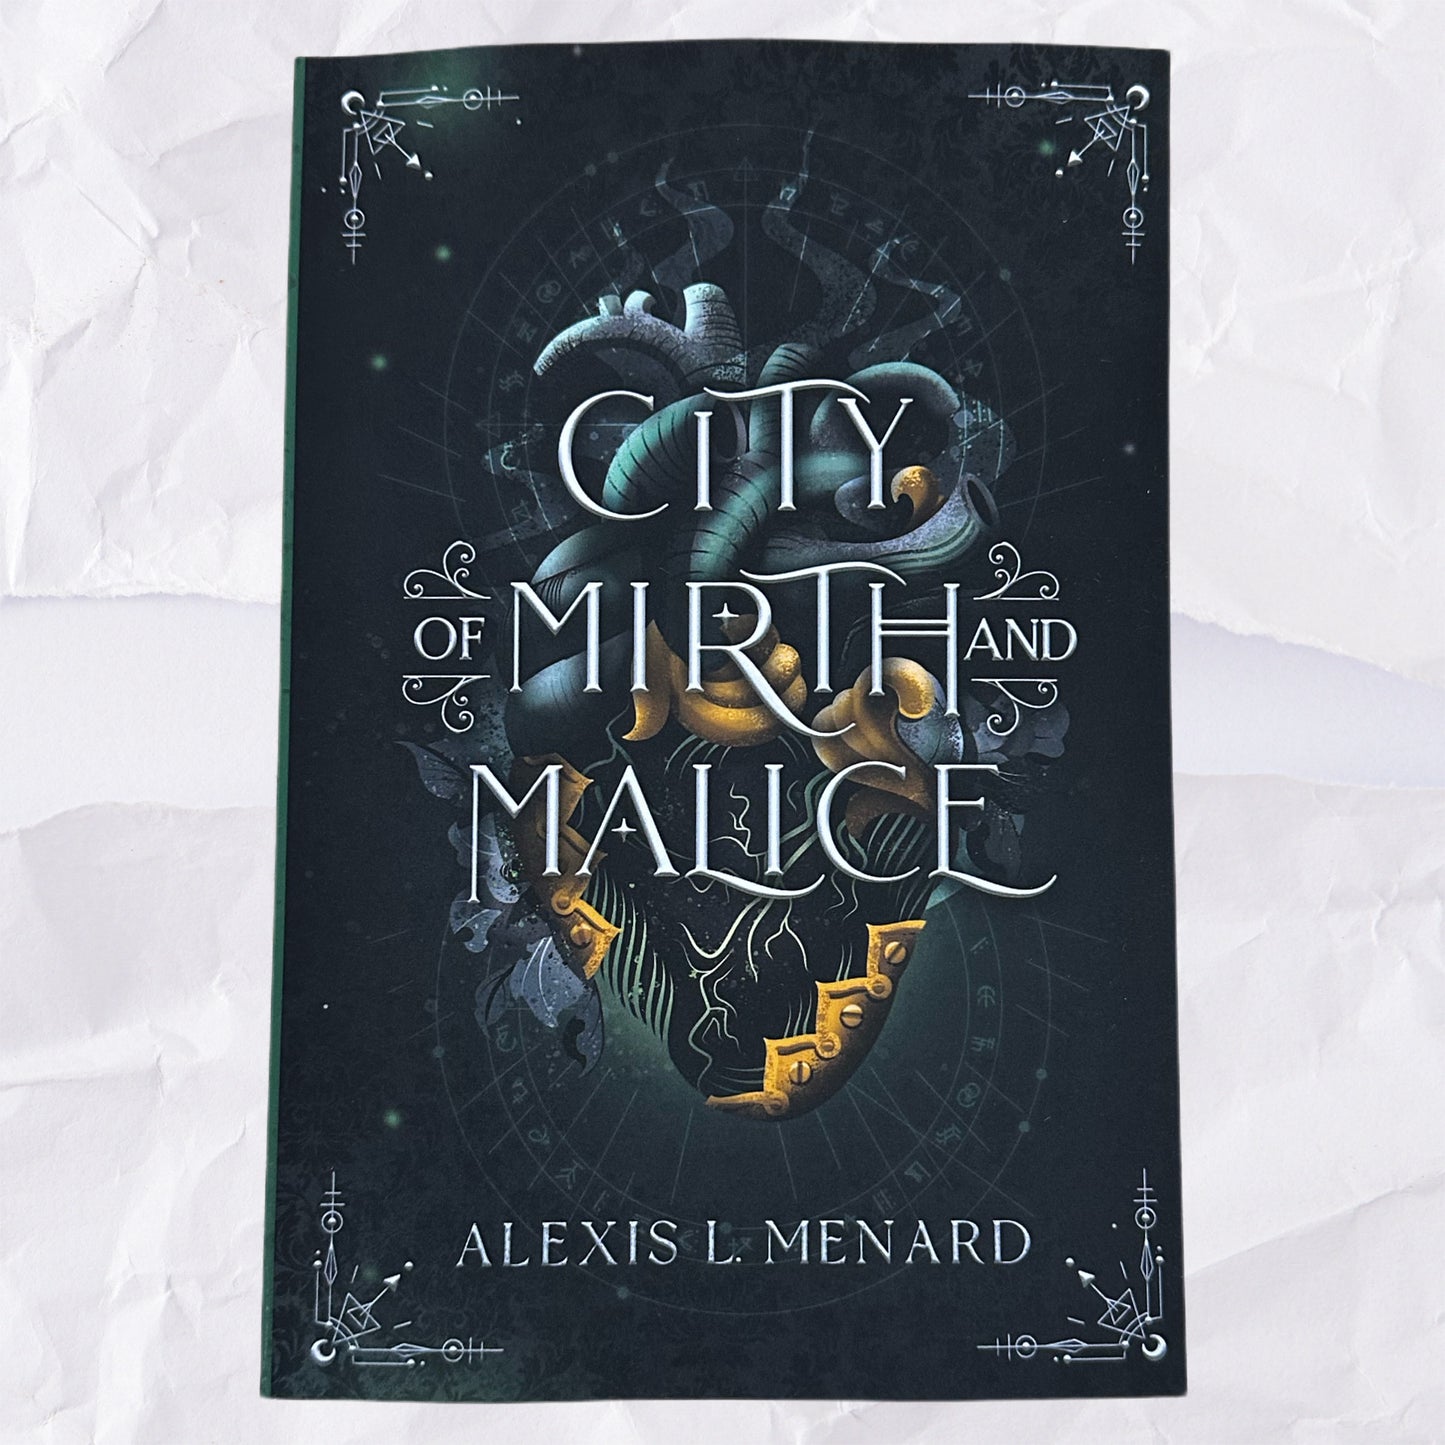 City of Mirth and Malice (Order and Chaos #2) by Alexis L. Menard